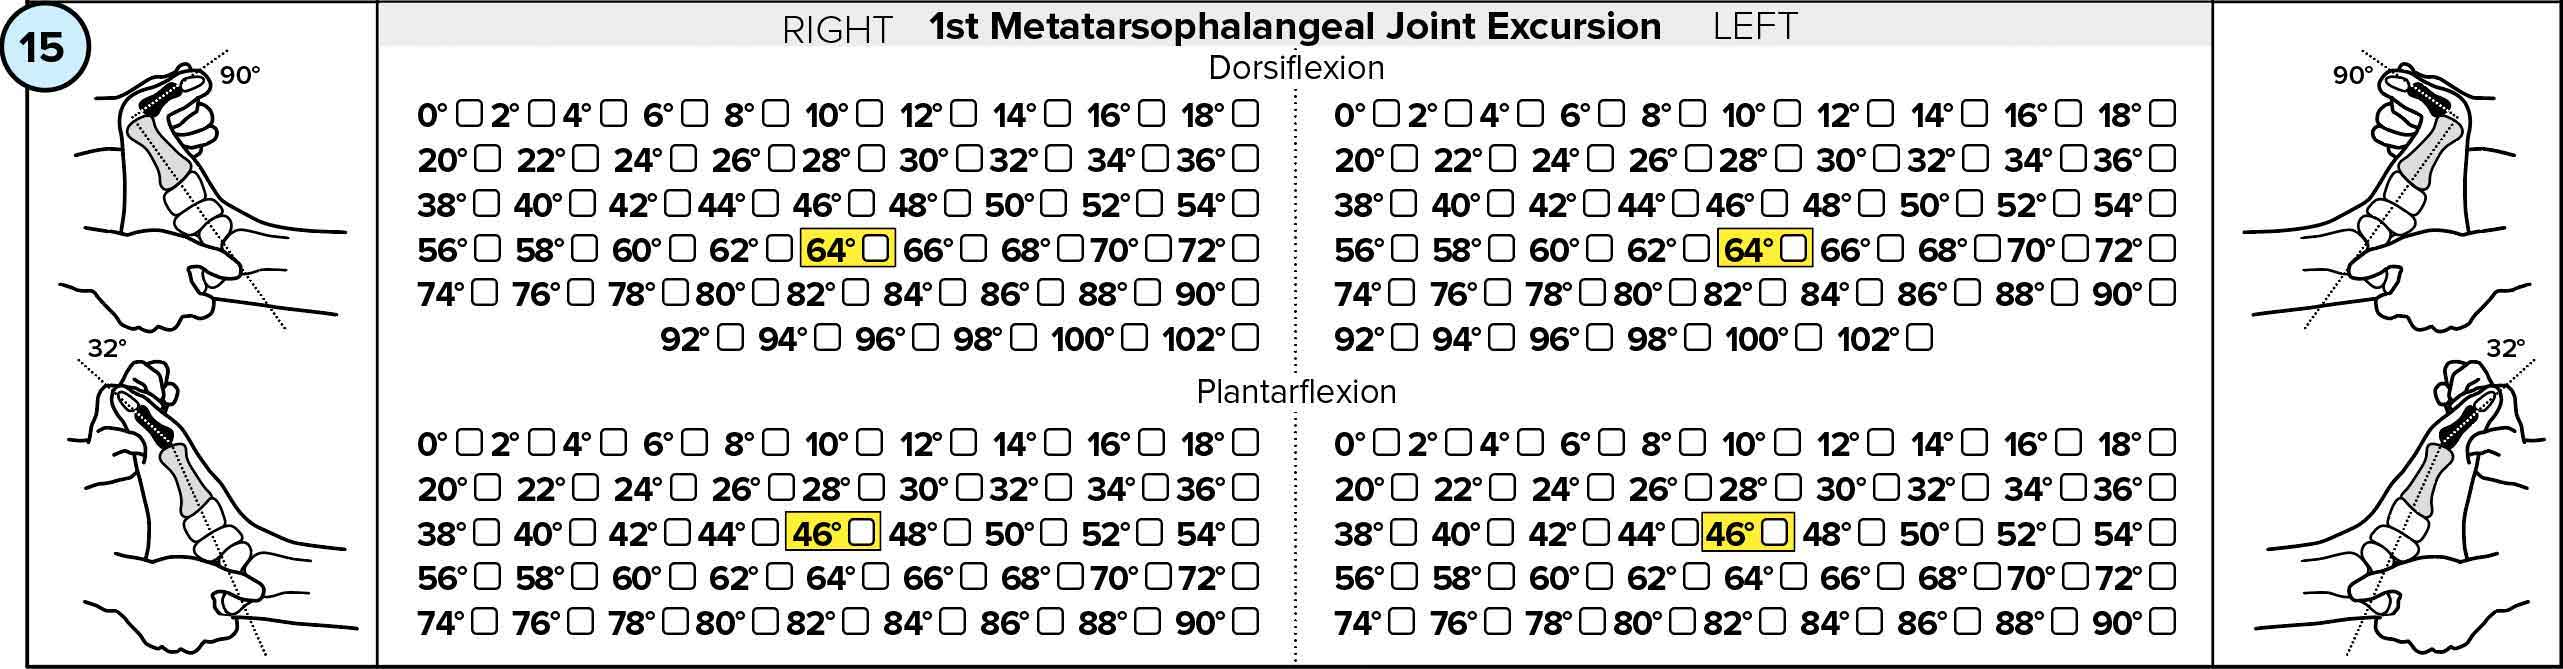 1st Metatarsophalangeal Joint Excursion